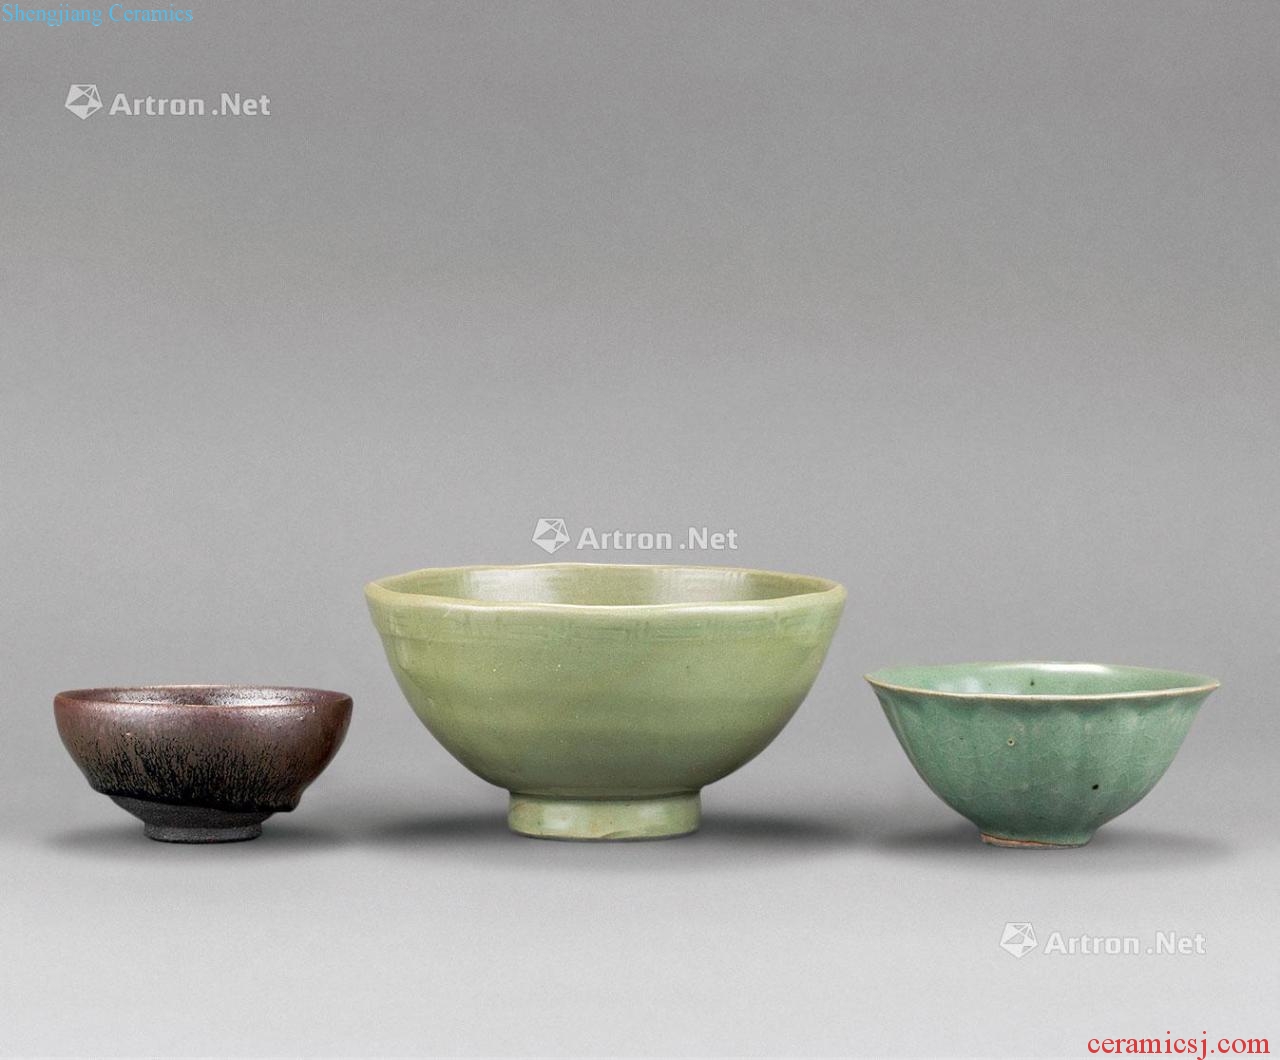 The song dynasty - built in Ming dynasty kiln TuHao lamp Longquan celadon bowls (three)